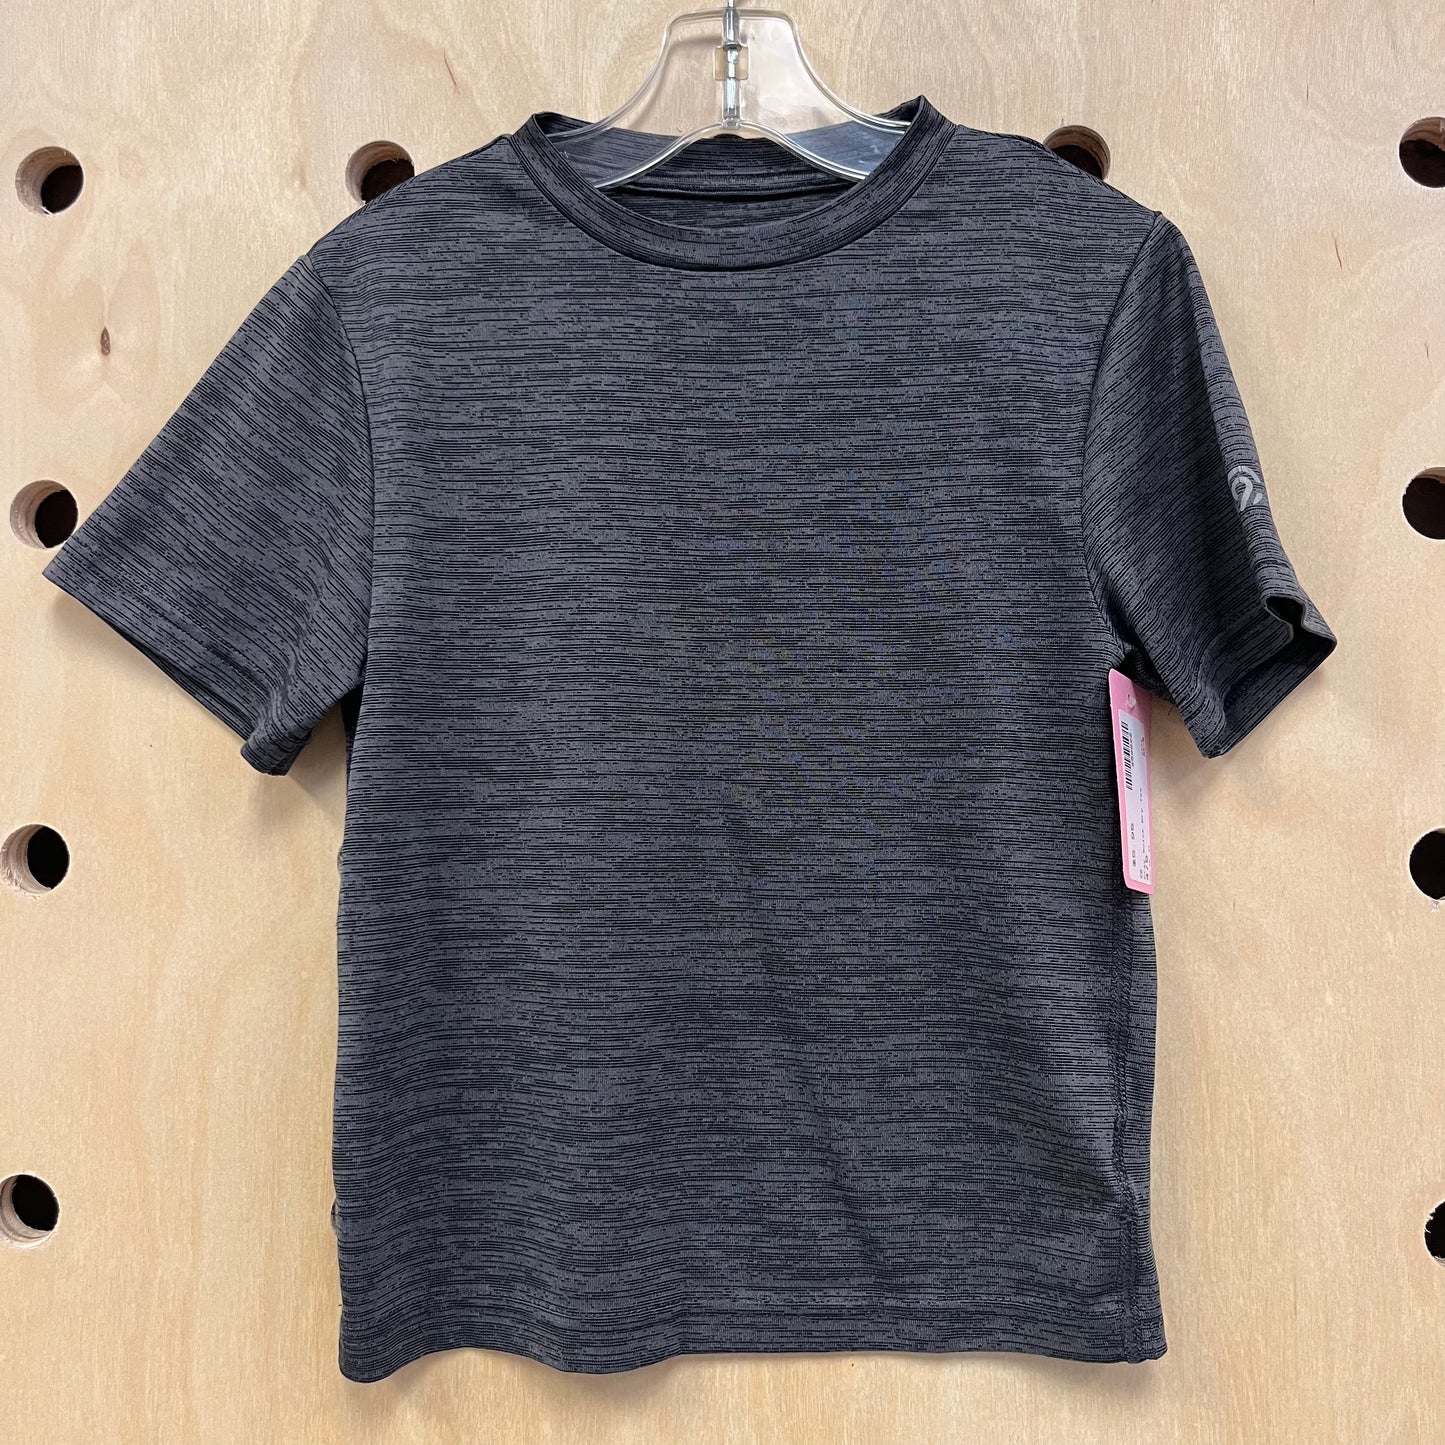 Charcoal Quick Dry Tee